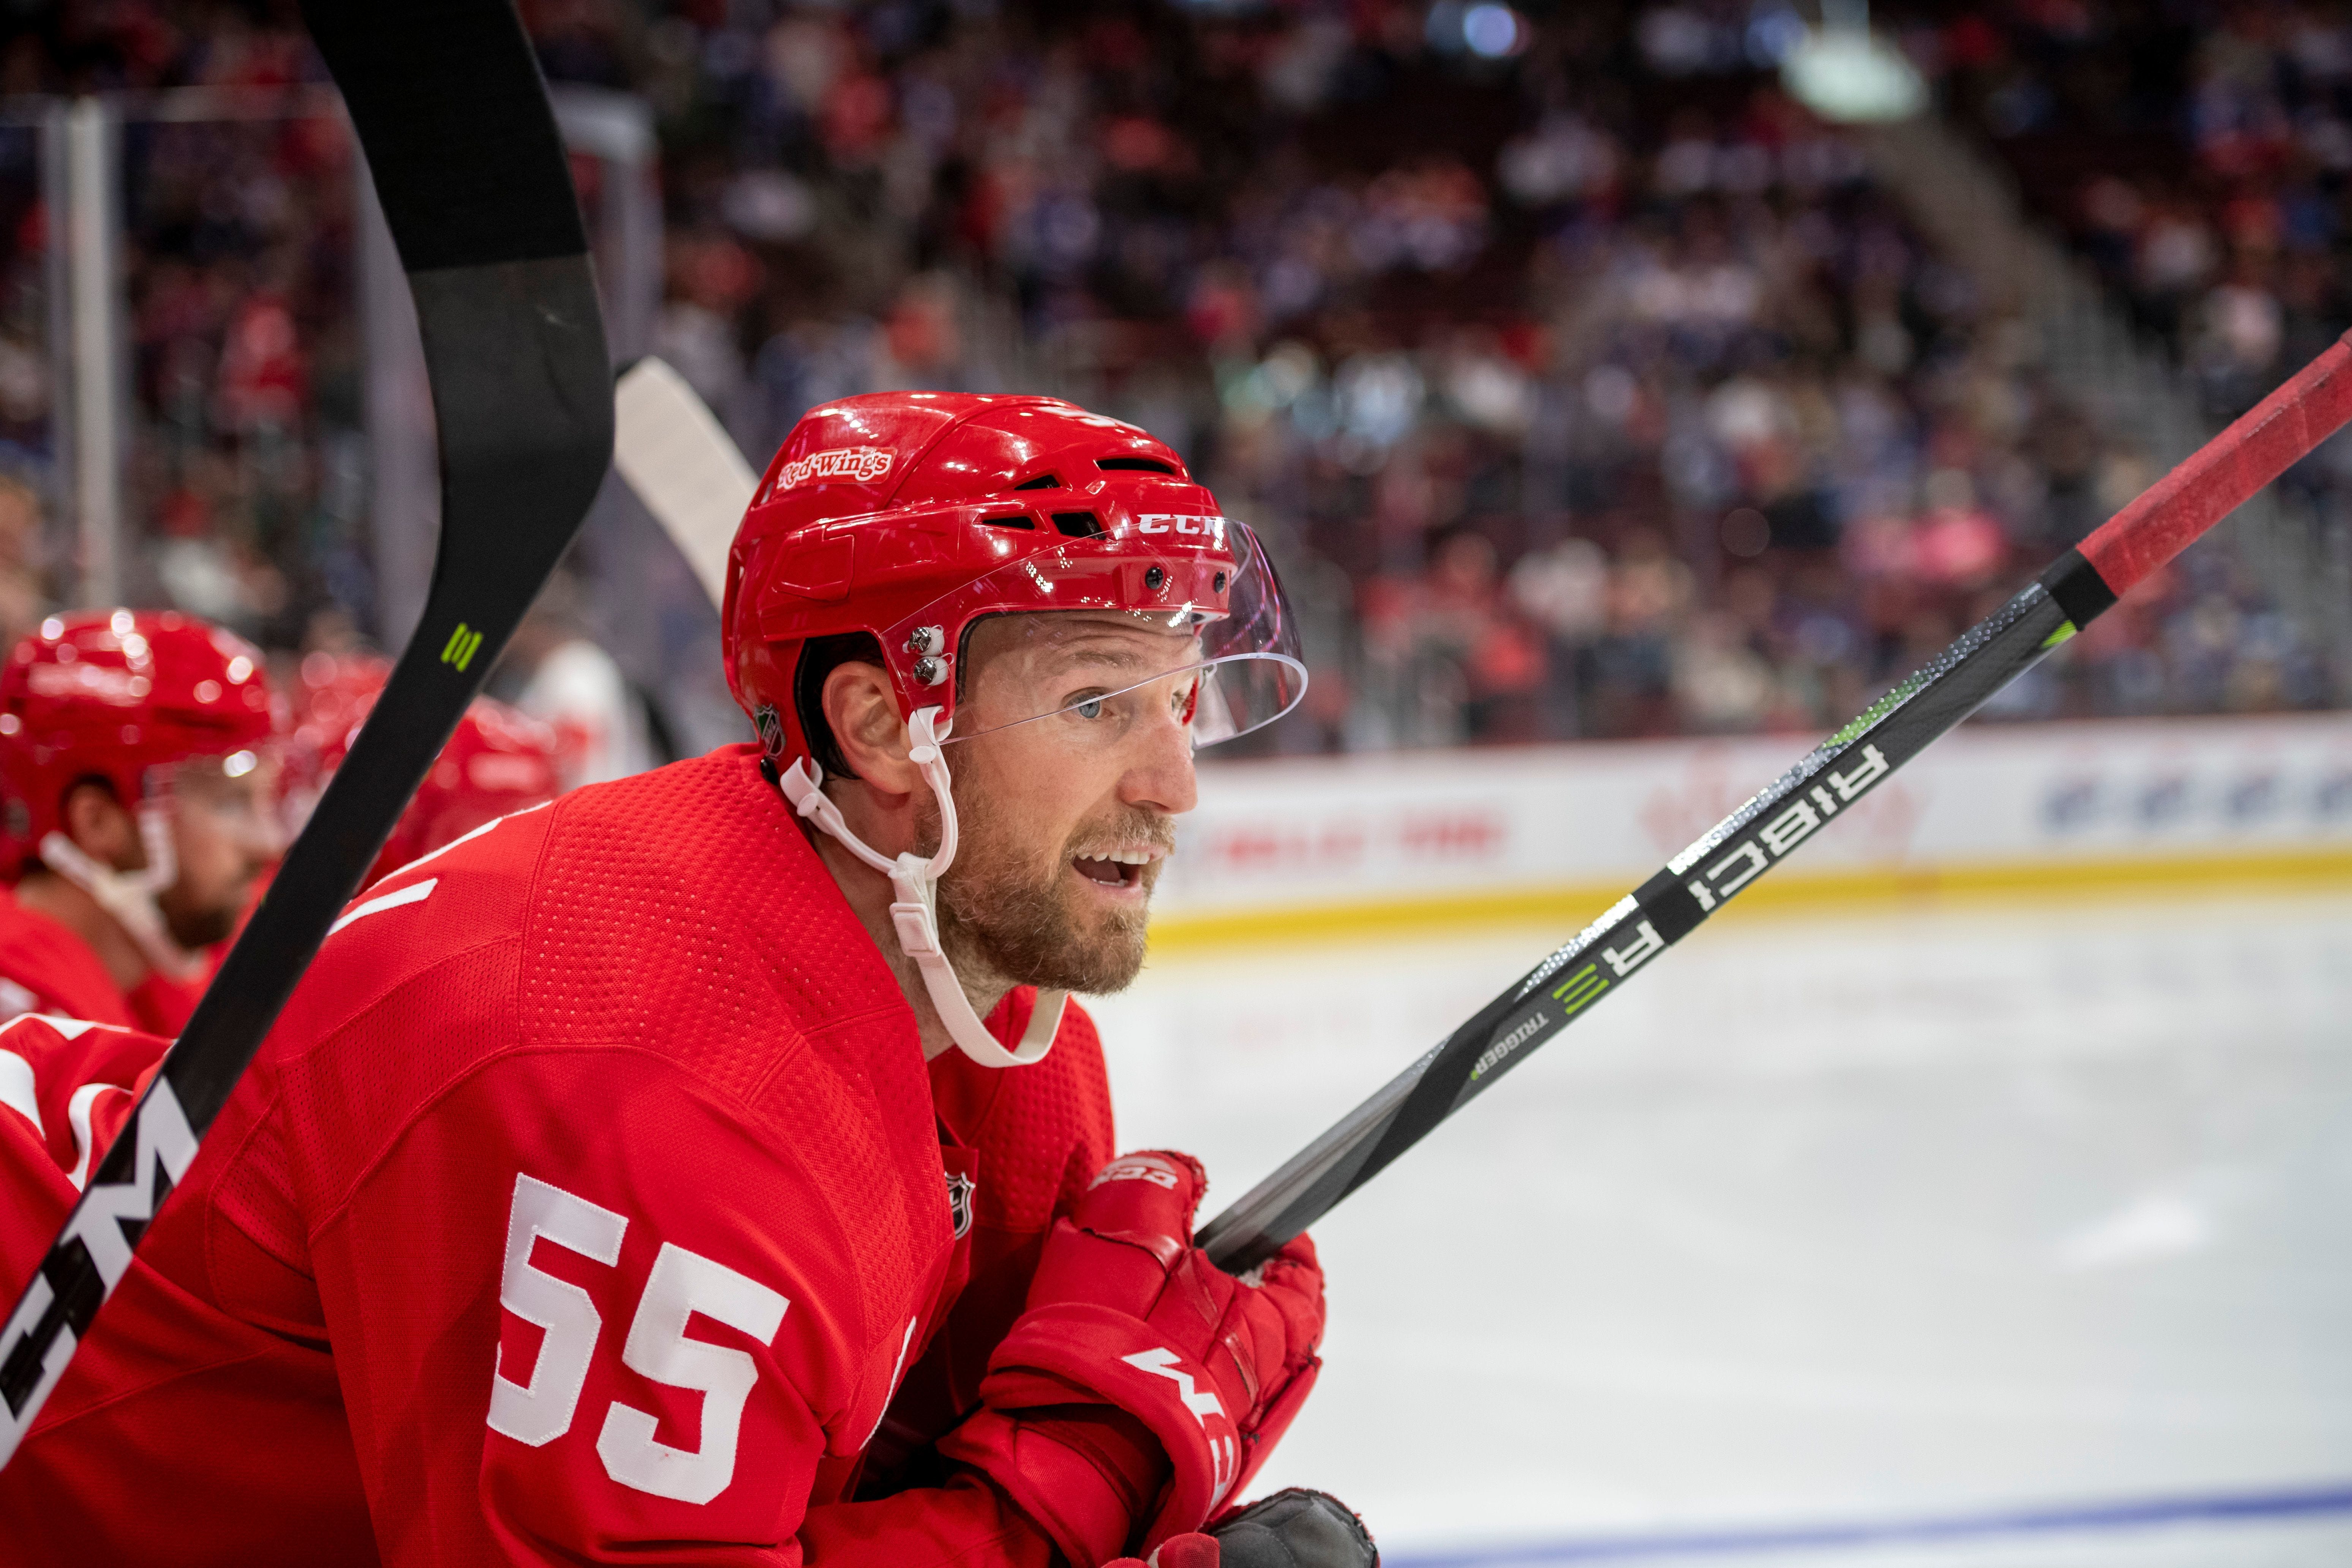 Niklas Kronwall,  38, played 15 seasons in the NHL, all in Detroit. He had 432 points (83 goals) in 953 games.